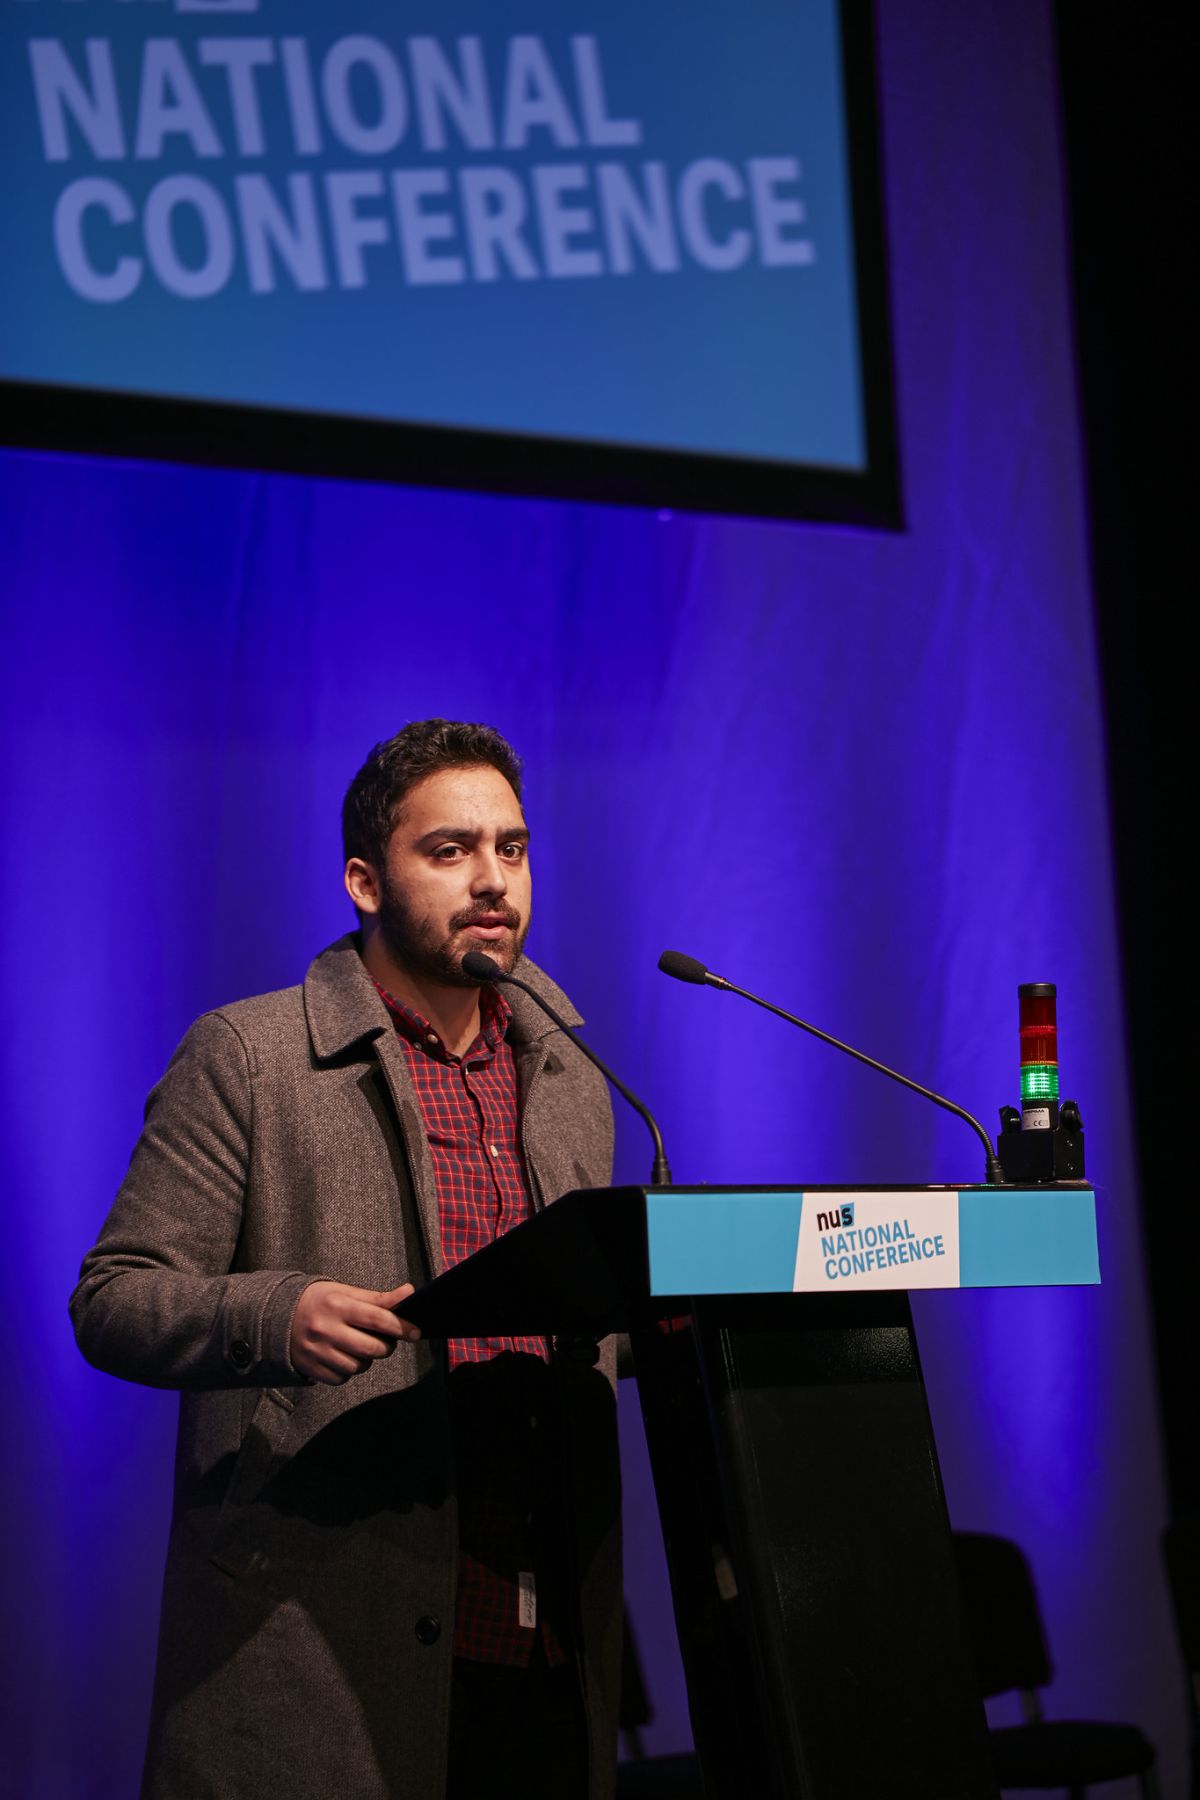 Zamzam Ibrahim elected NUS President amid groundbreaking reforms at conference